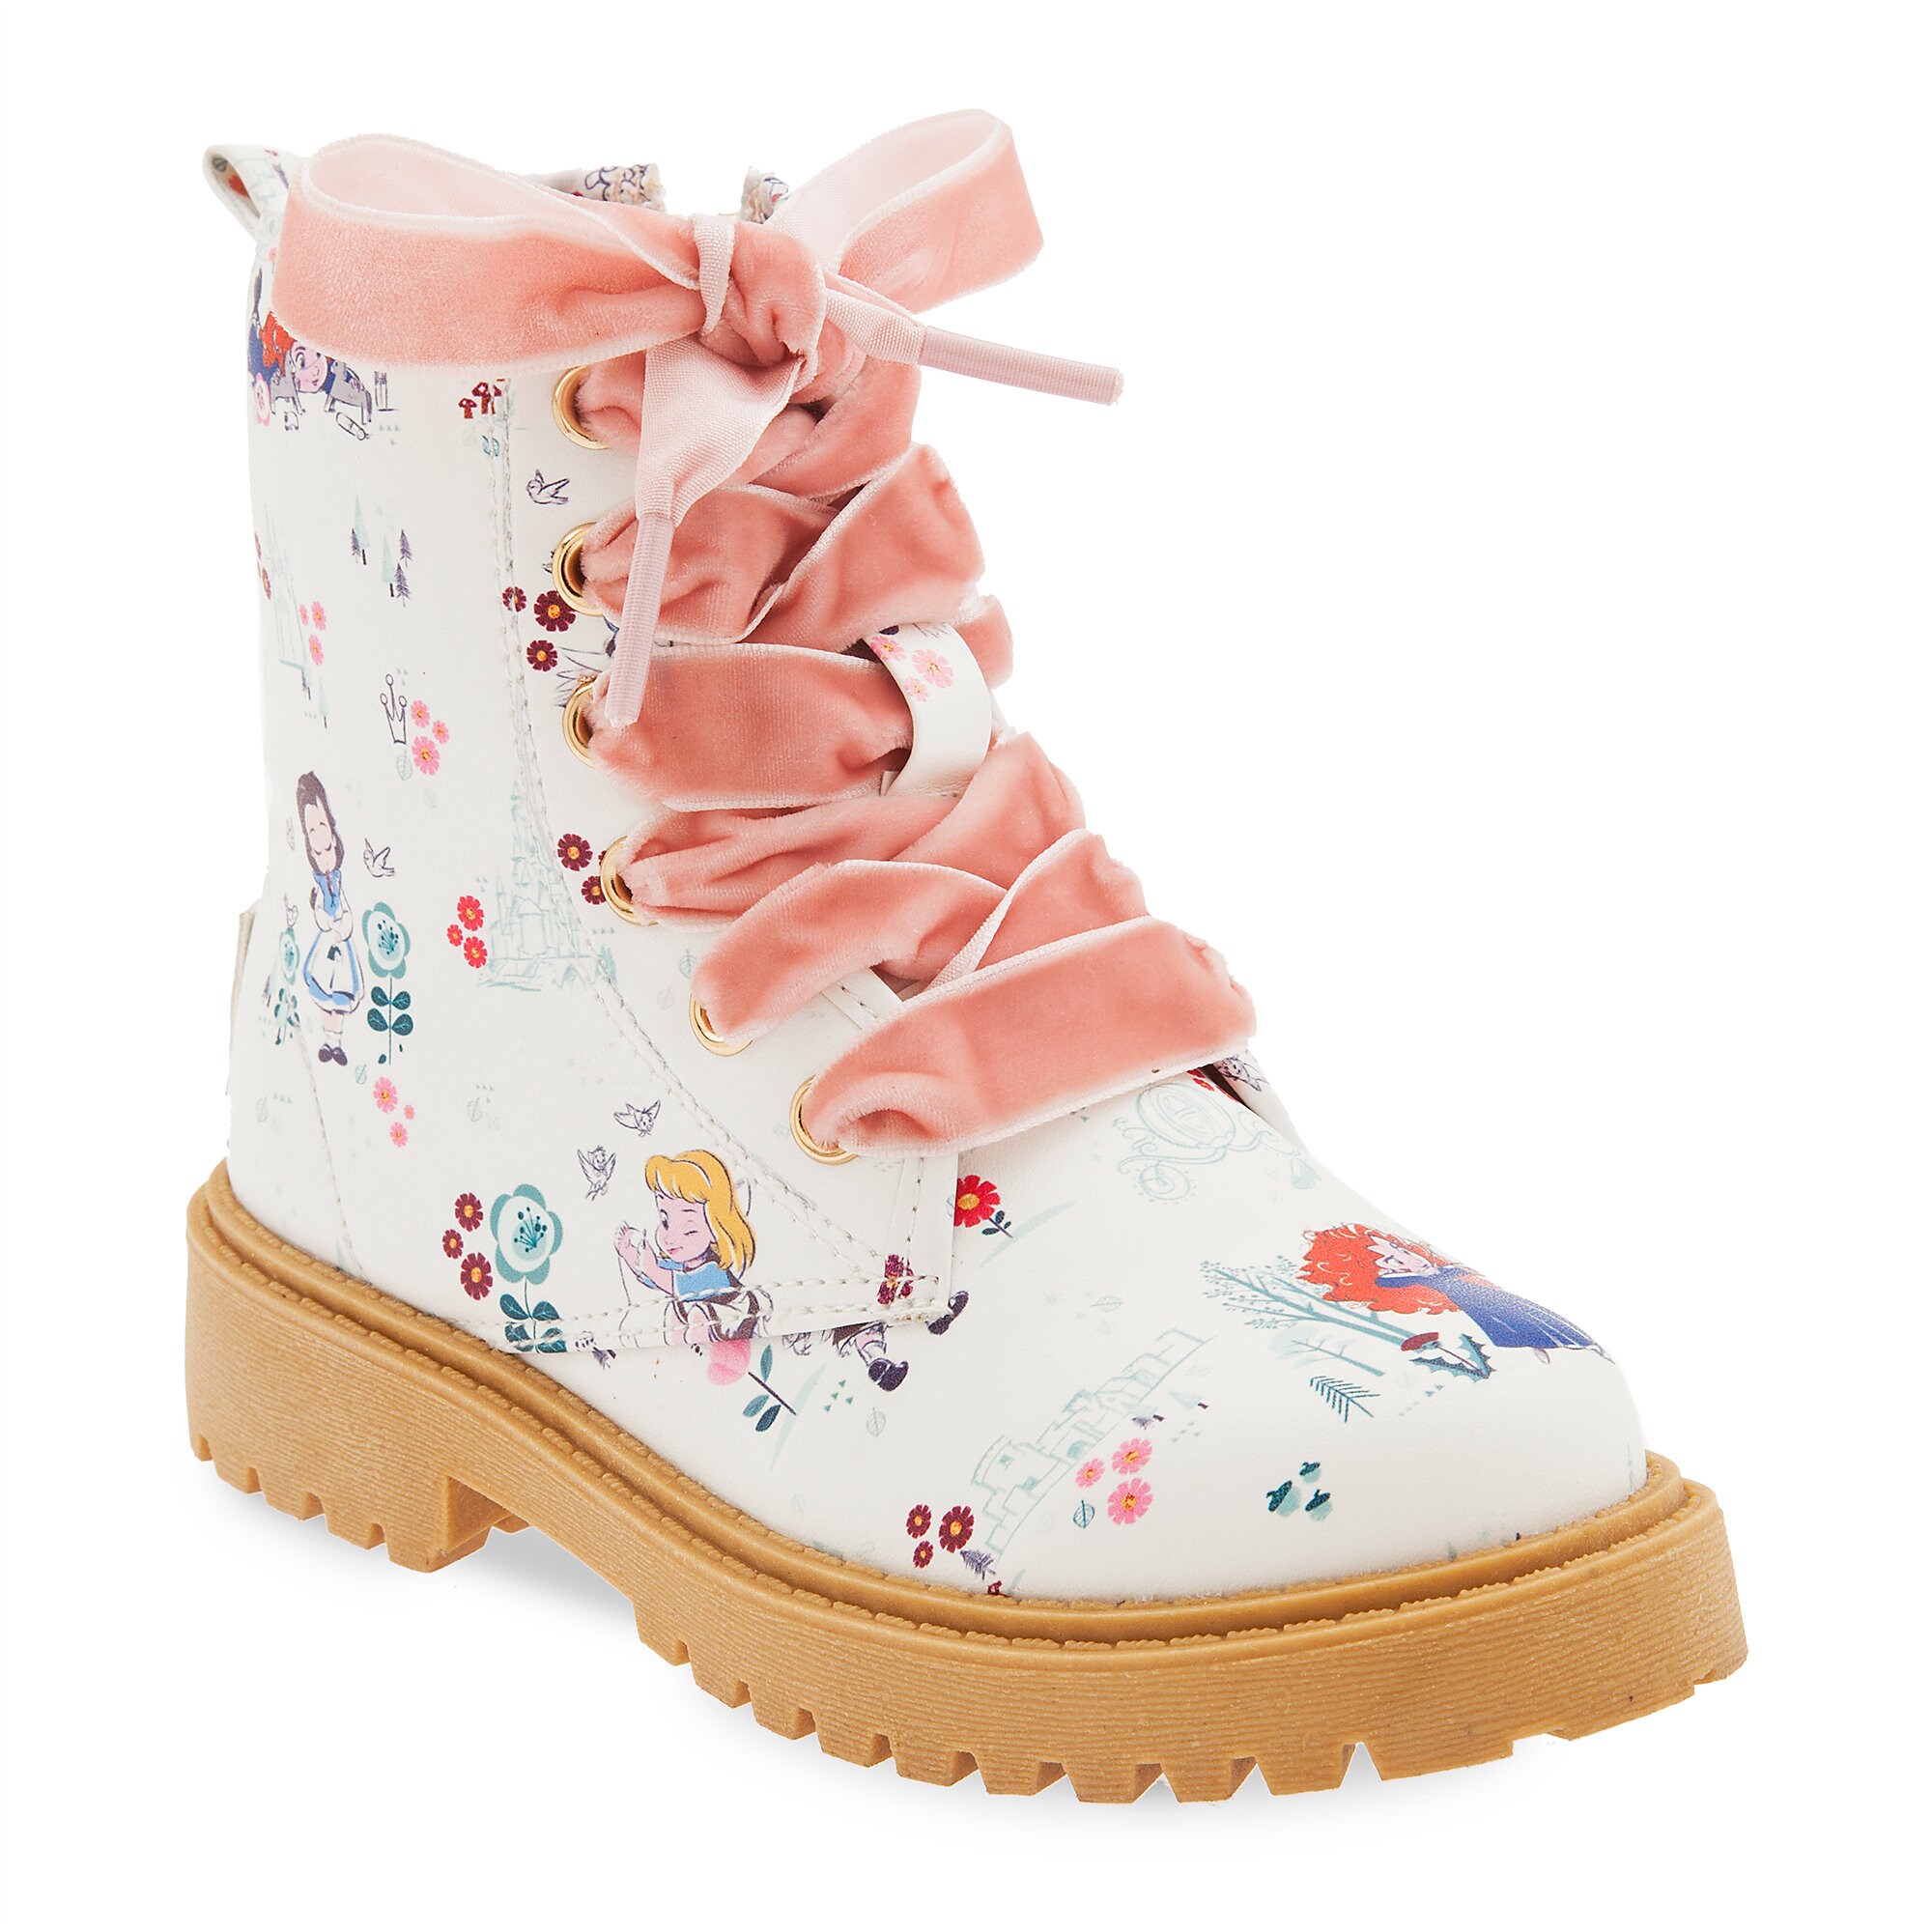 Disney Animators' Collection Boots for Girls